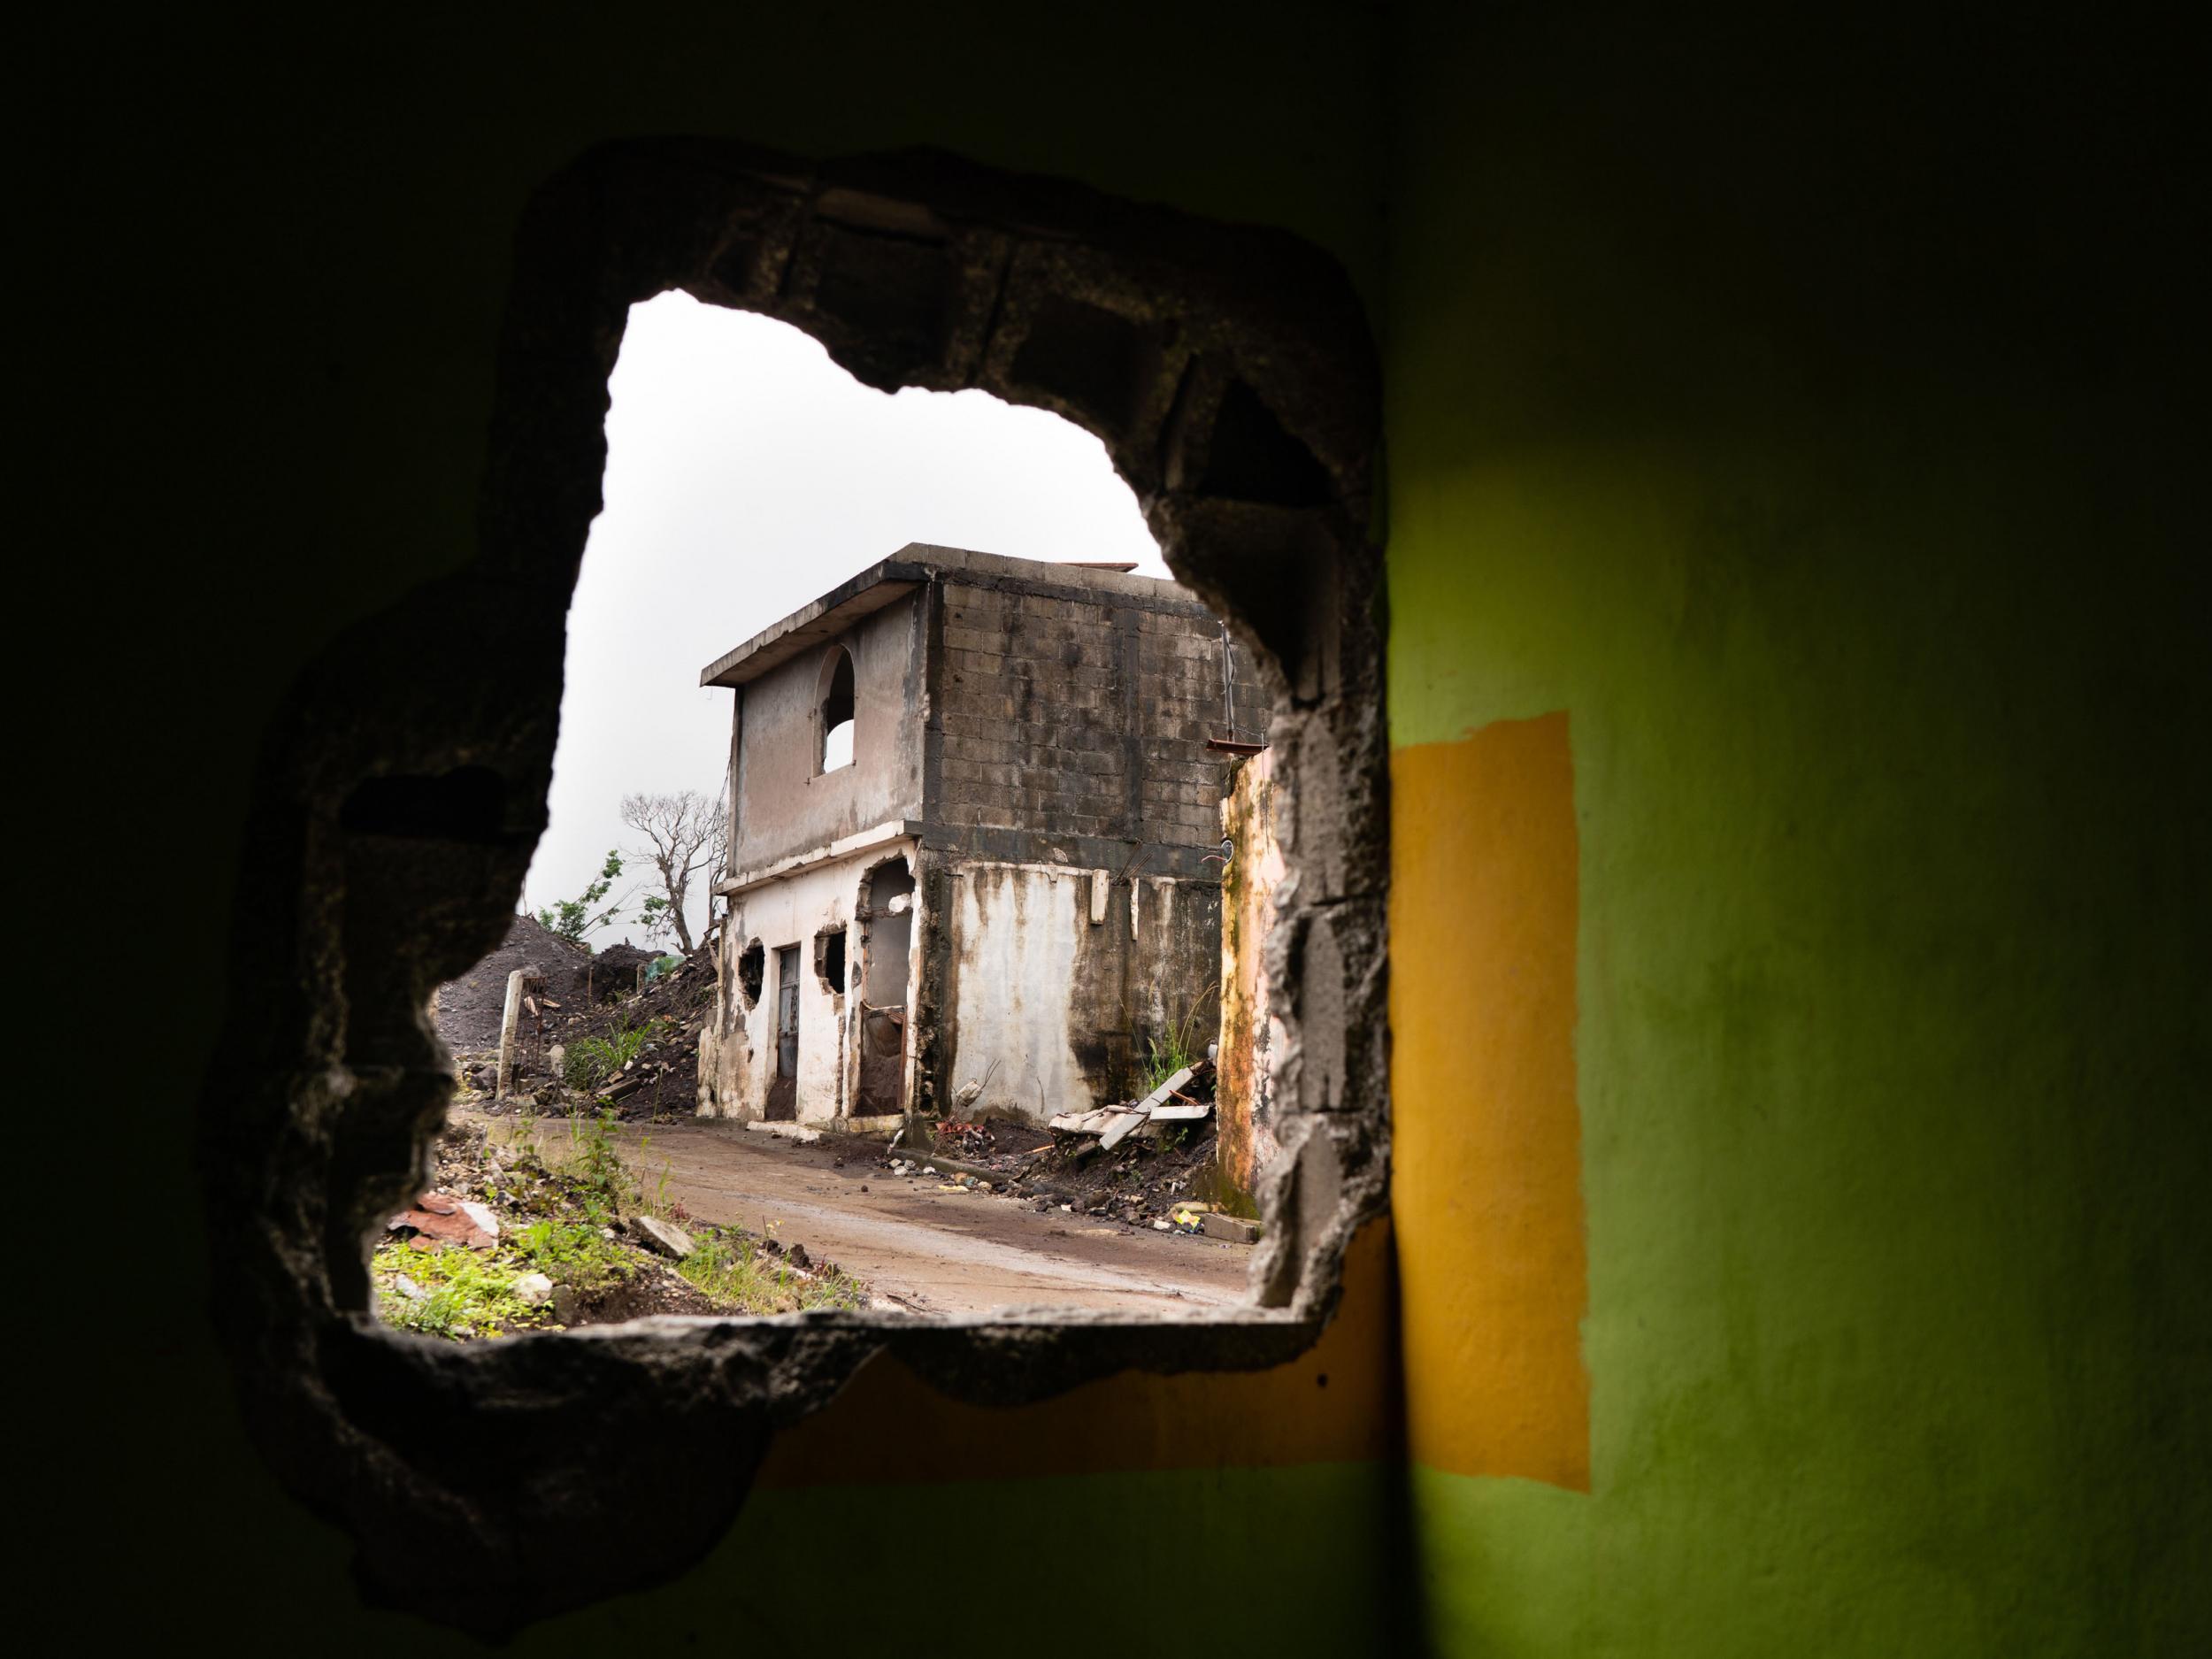 The former village of San Miguel Los Lotes through another building destroyed by a volcano (The Washington Post)